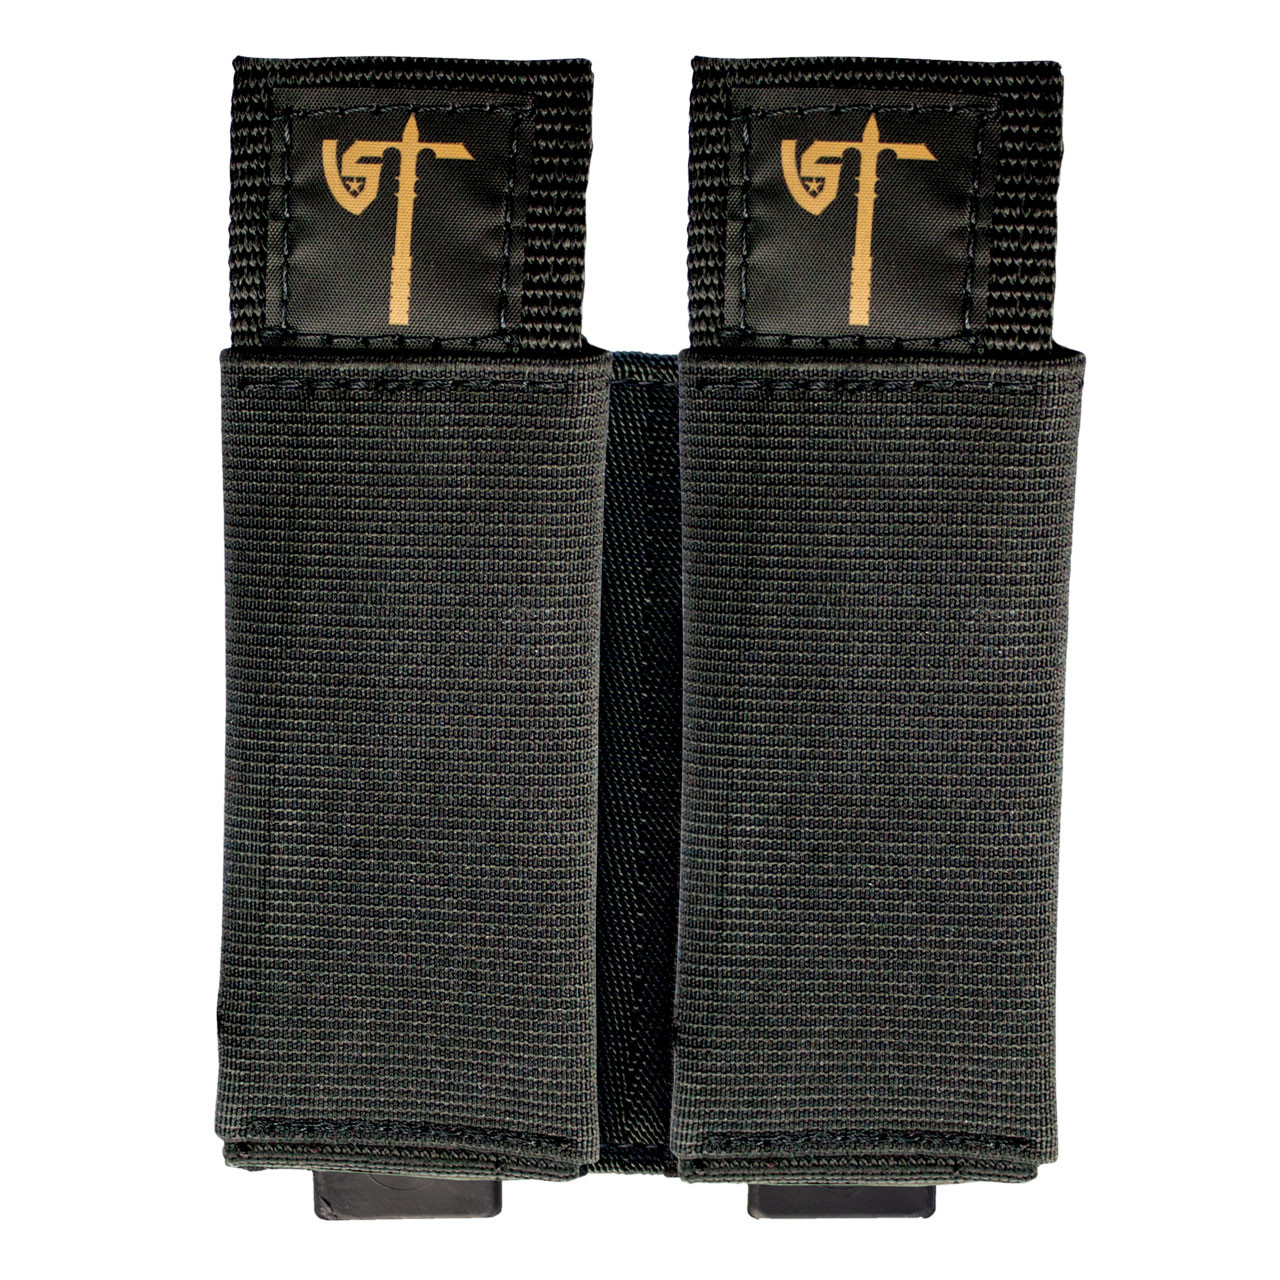 UST-Double Mag Pouch